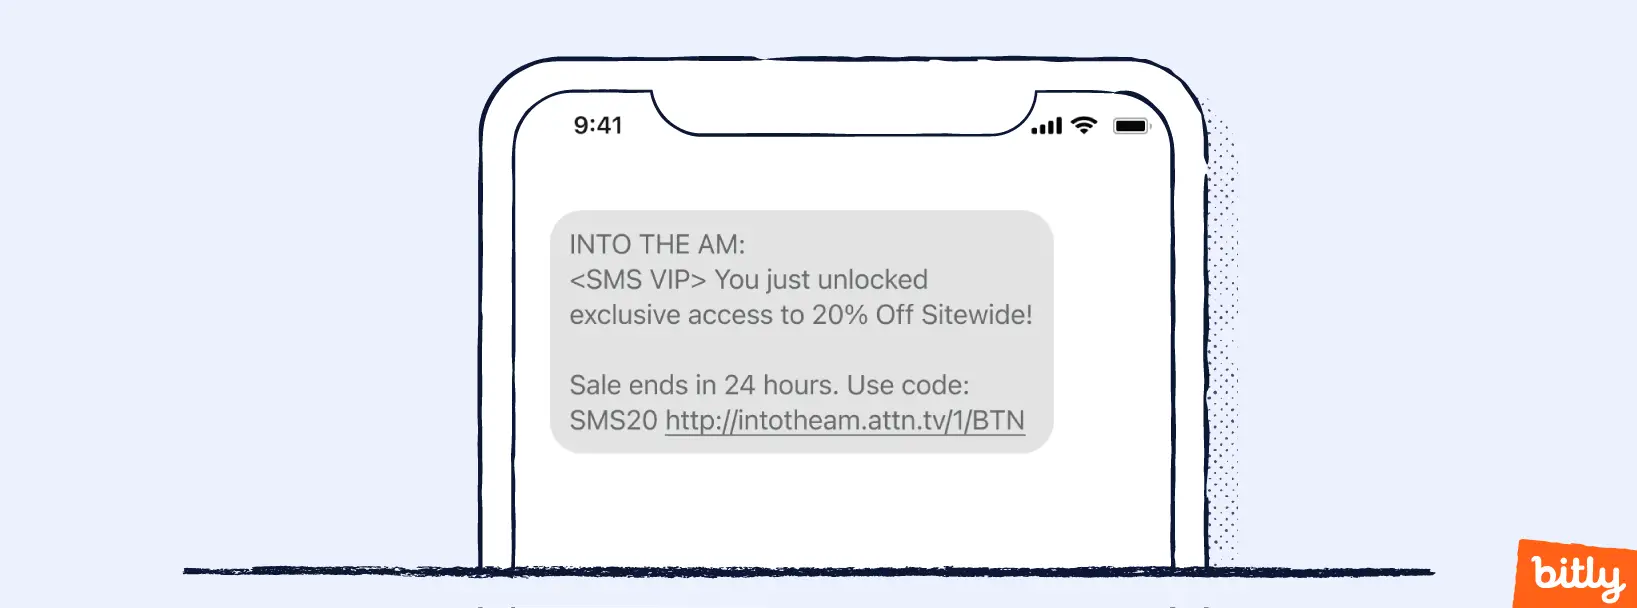 An SMS on a smartphone informing the user that they get 20% off on a sale.